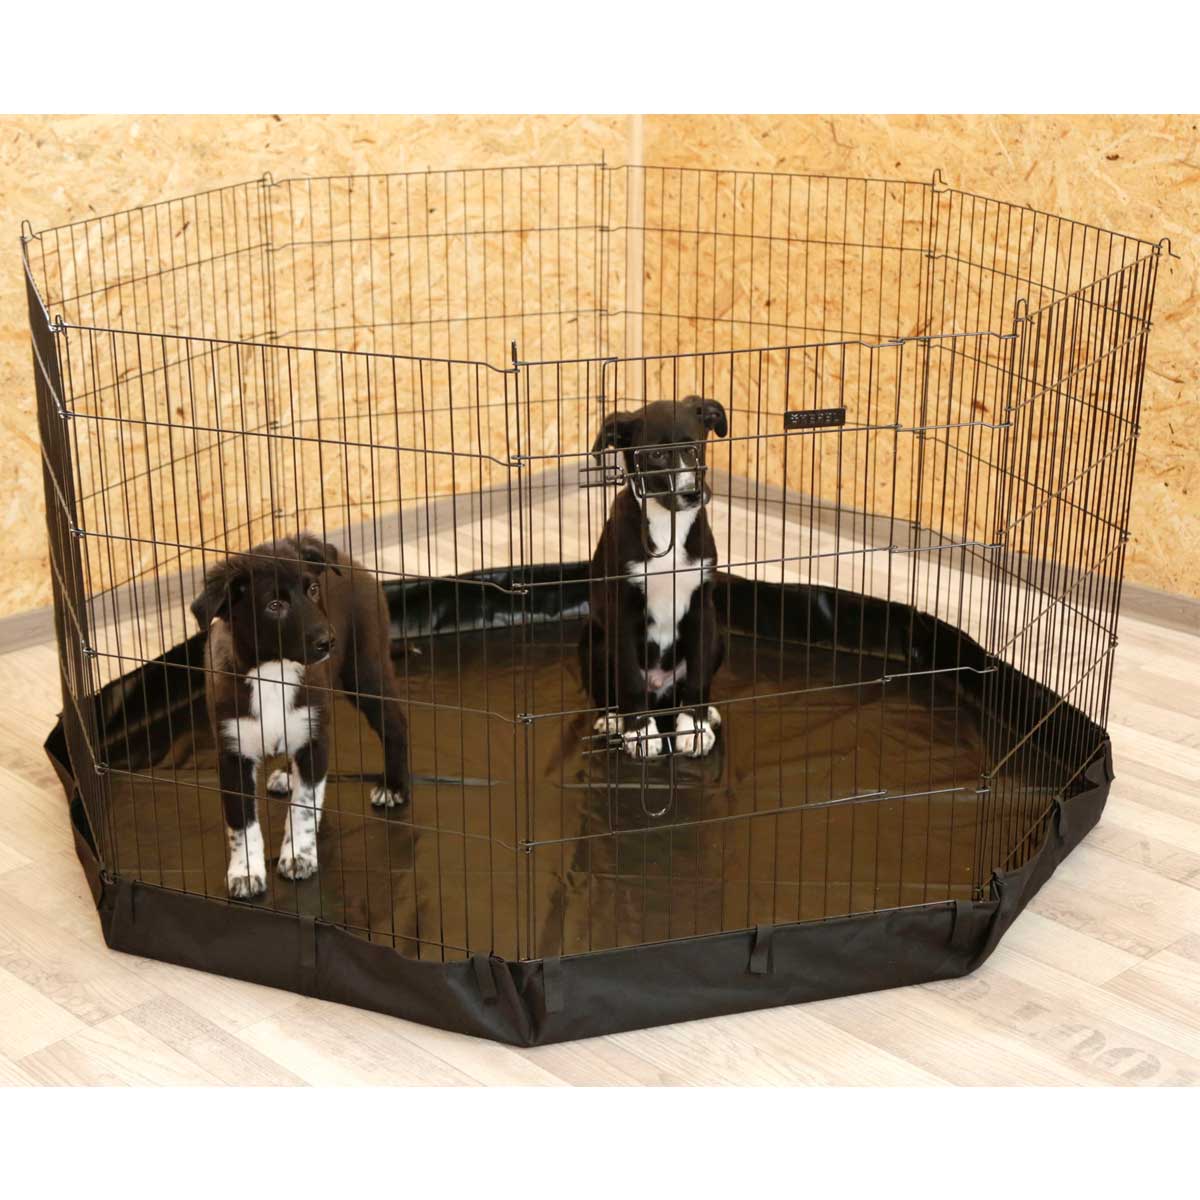 Kerbl Puppy and Small Animal Pen